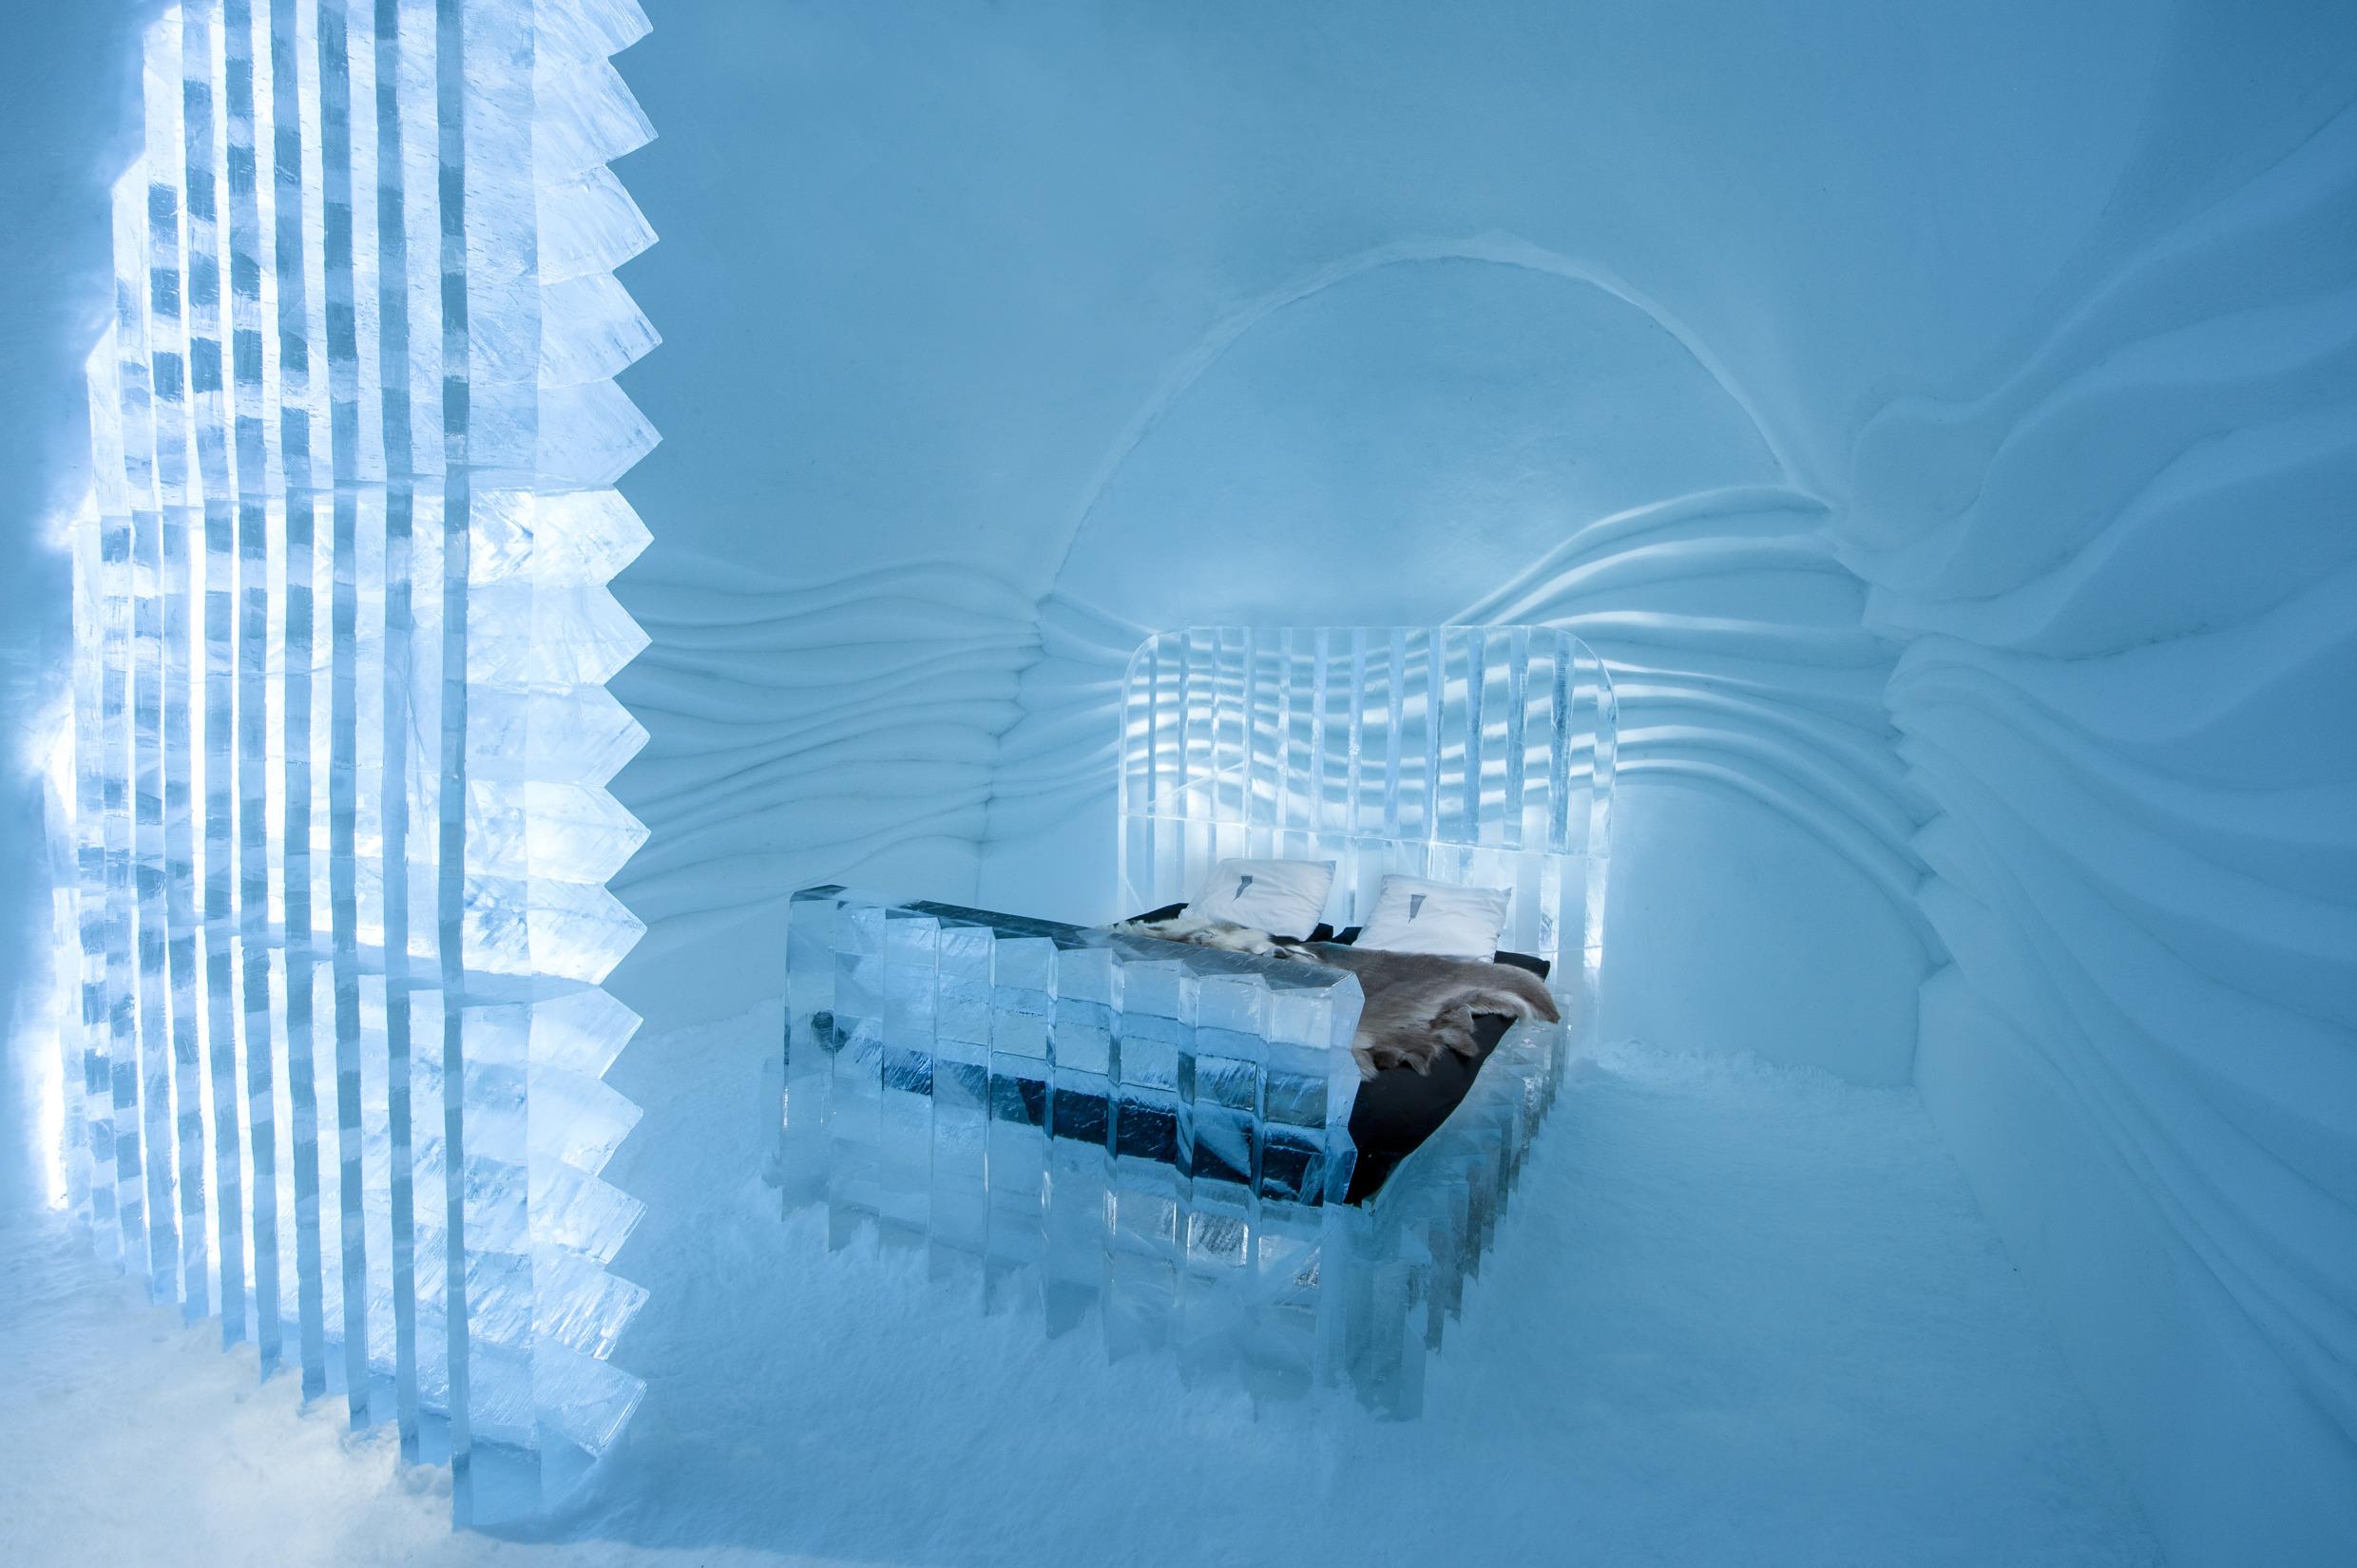 A room with a bed, all made of ice.